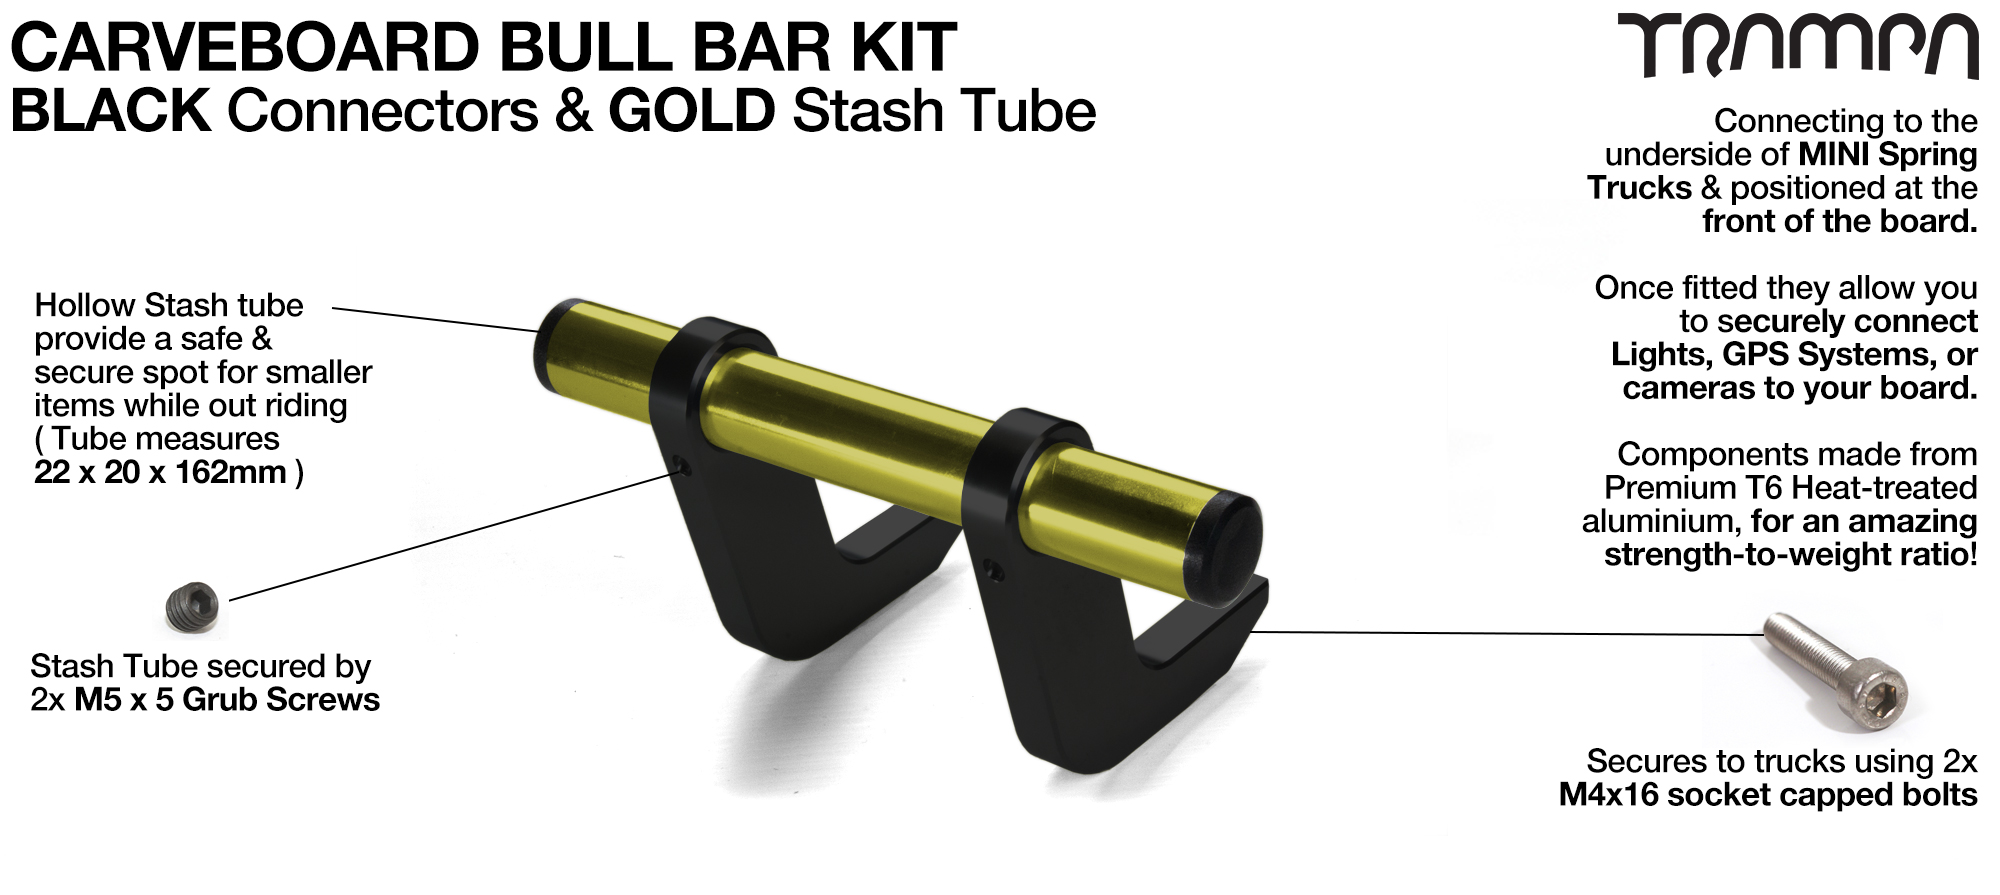 BLACK Uprights & GOLD Crossbar BULL BARS for CARVE BOARDS using T6 Heat Treated CNC'd AluminIum Clamps, Hollow Aluminium Stash Tubes with Rubber end bungs 